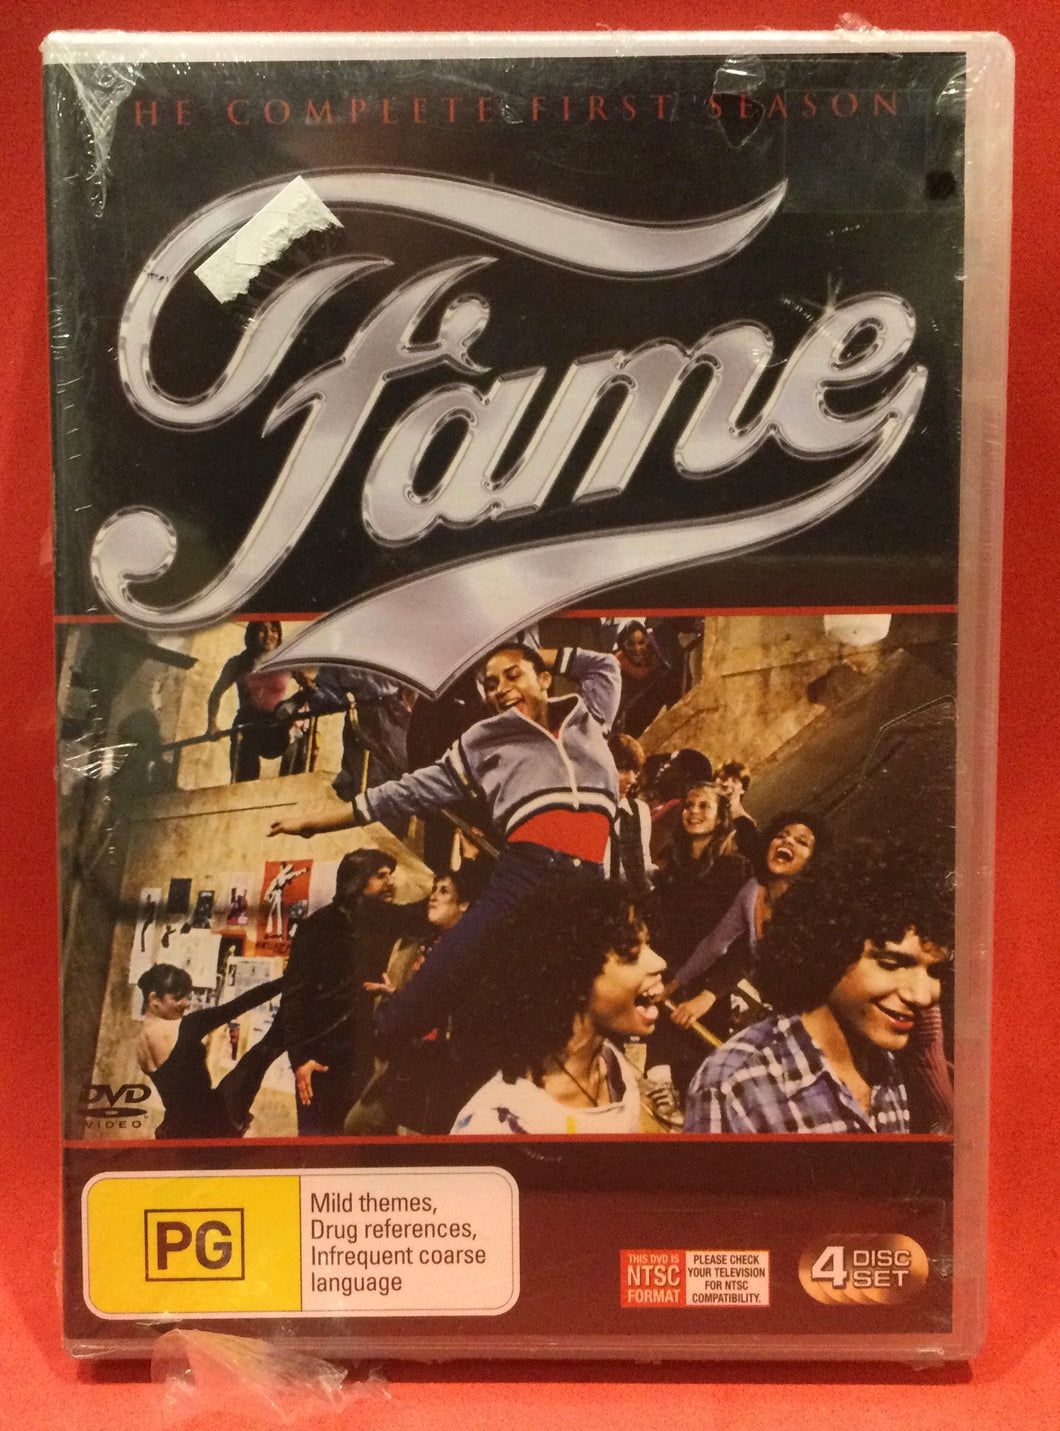 FAME - THE COMPLETE FIRST SEASON - 4 DVD DISCS (SEALED)